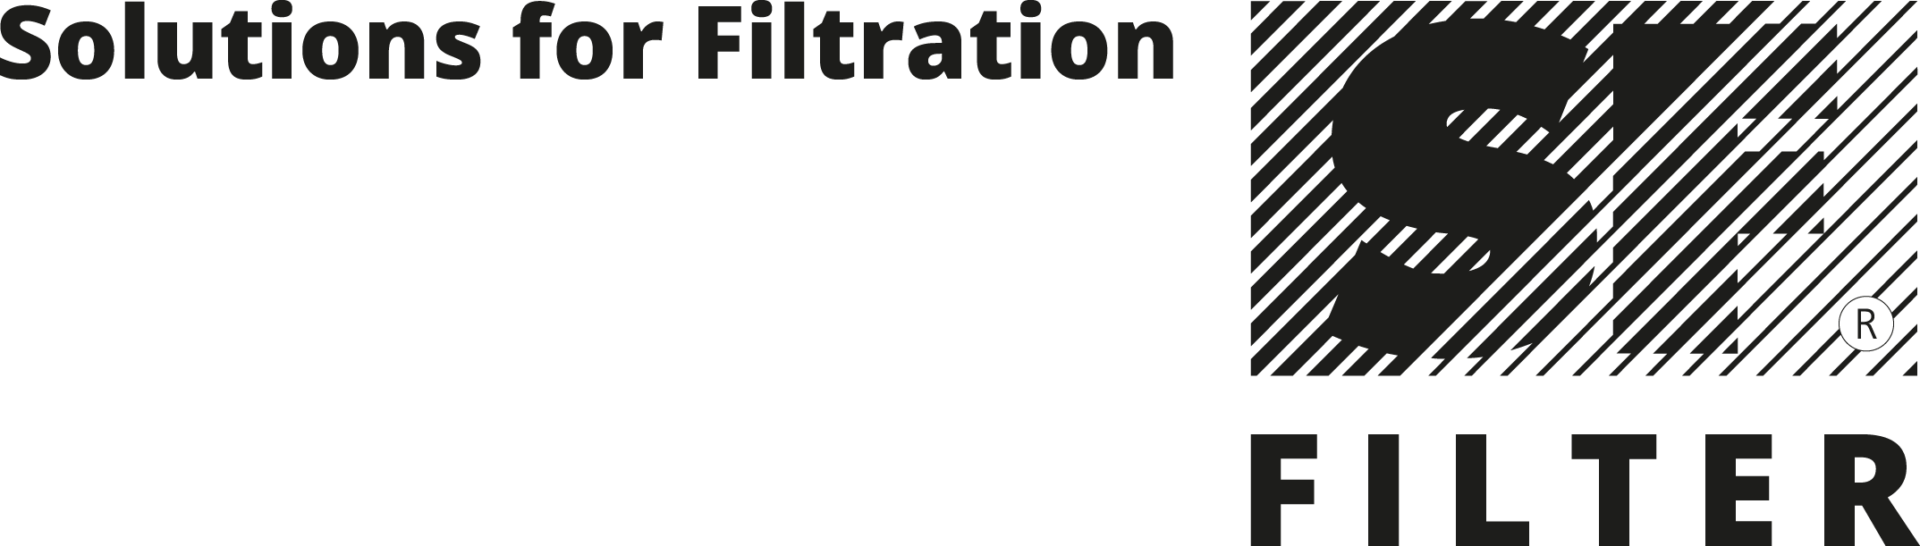 SF-Logo-Solutions-for-Filtration